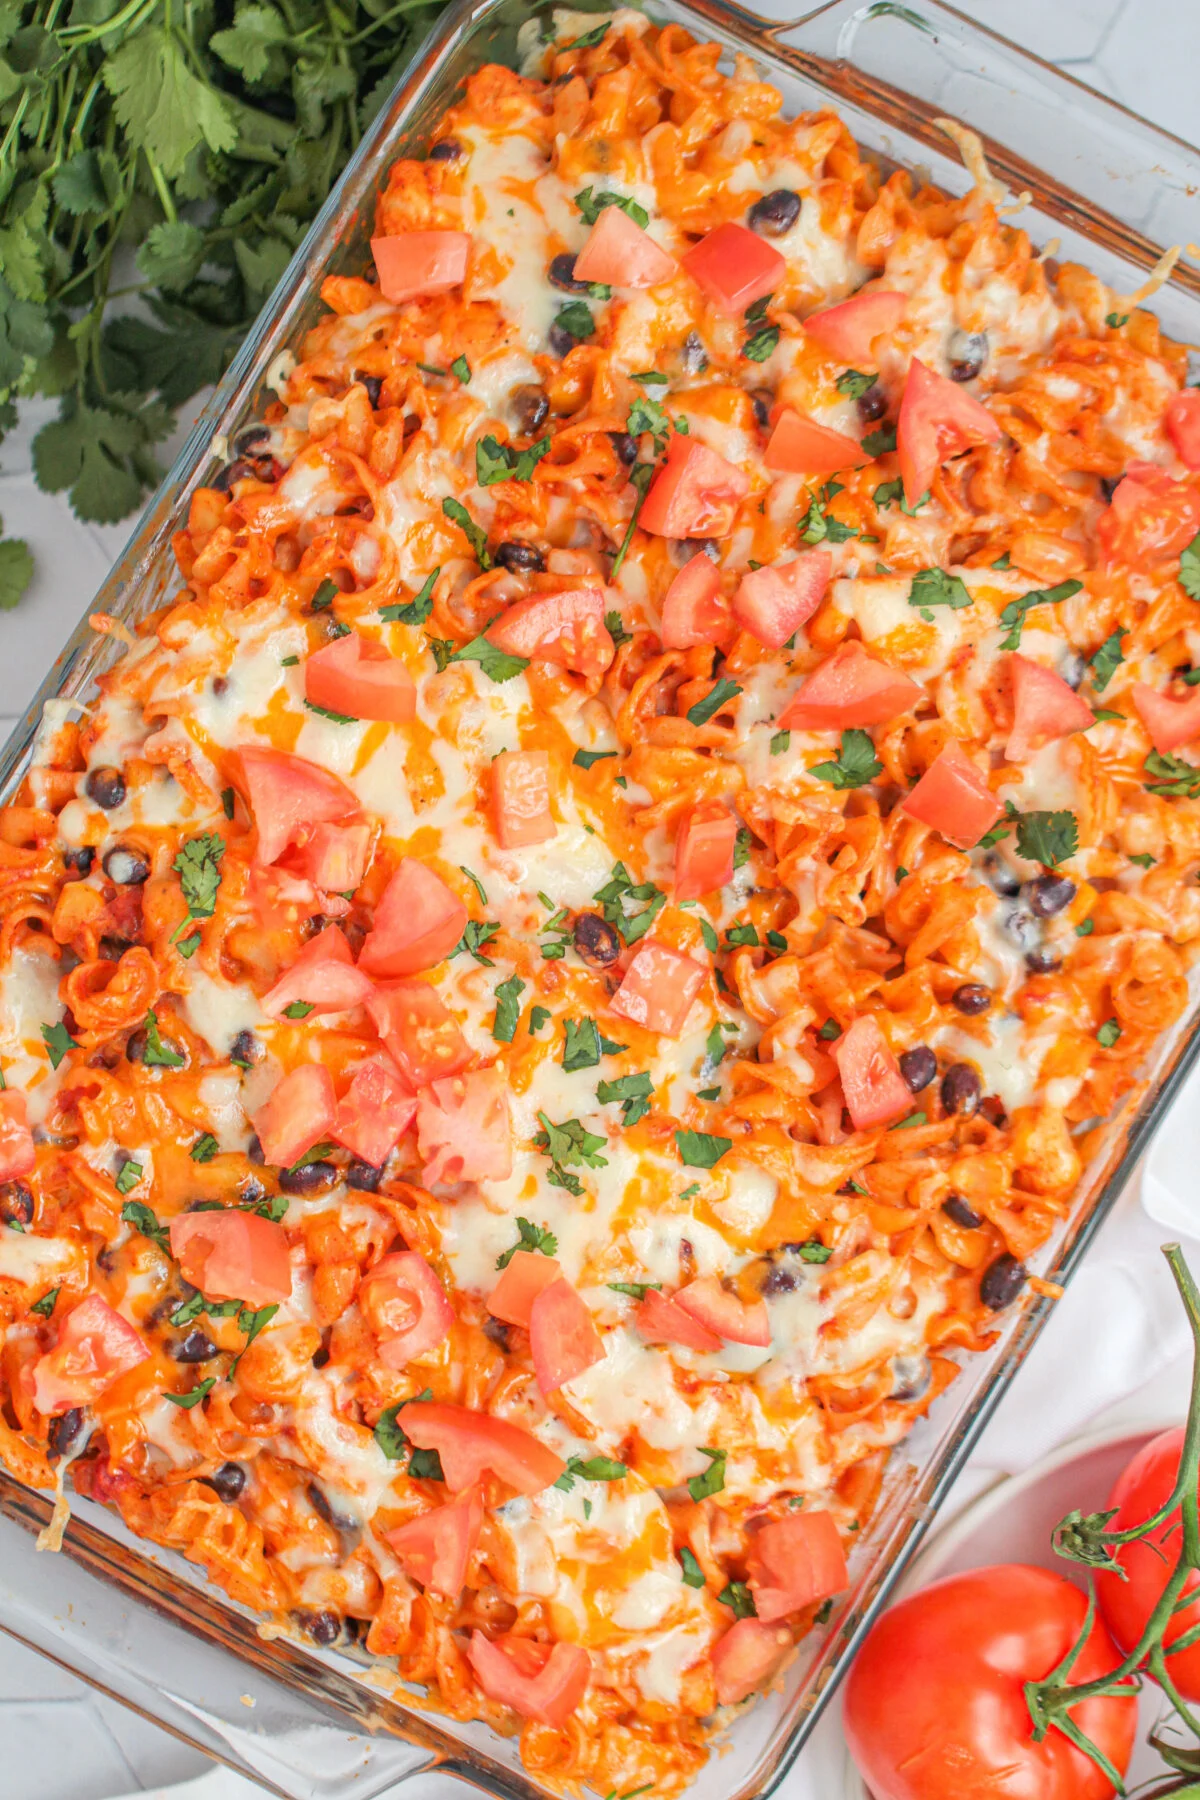 Fiesta Chicken Casserole is a fun twist on the traditional chicken and noodle casserole. It's easy to make, and full of Tex-Mex flavours!